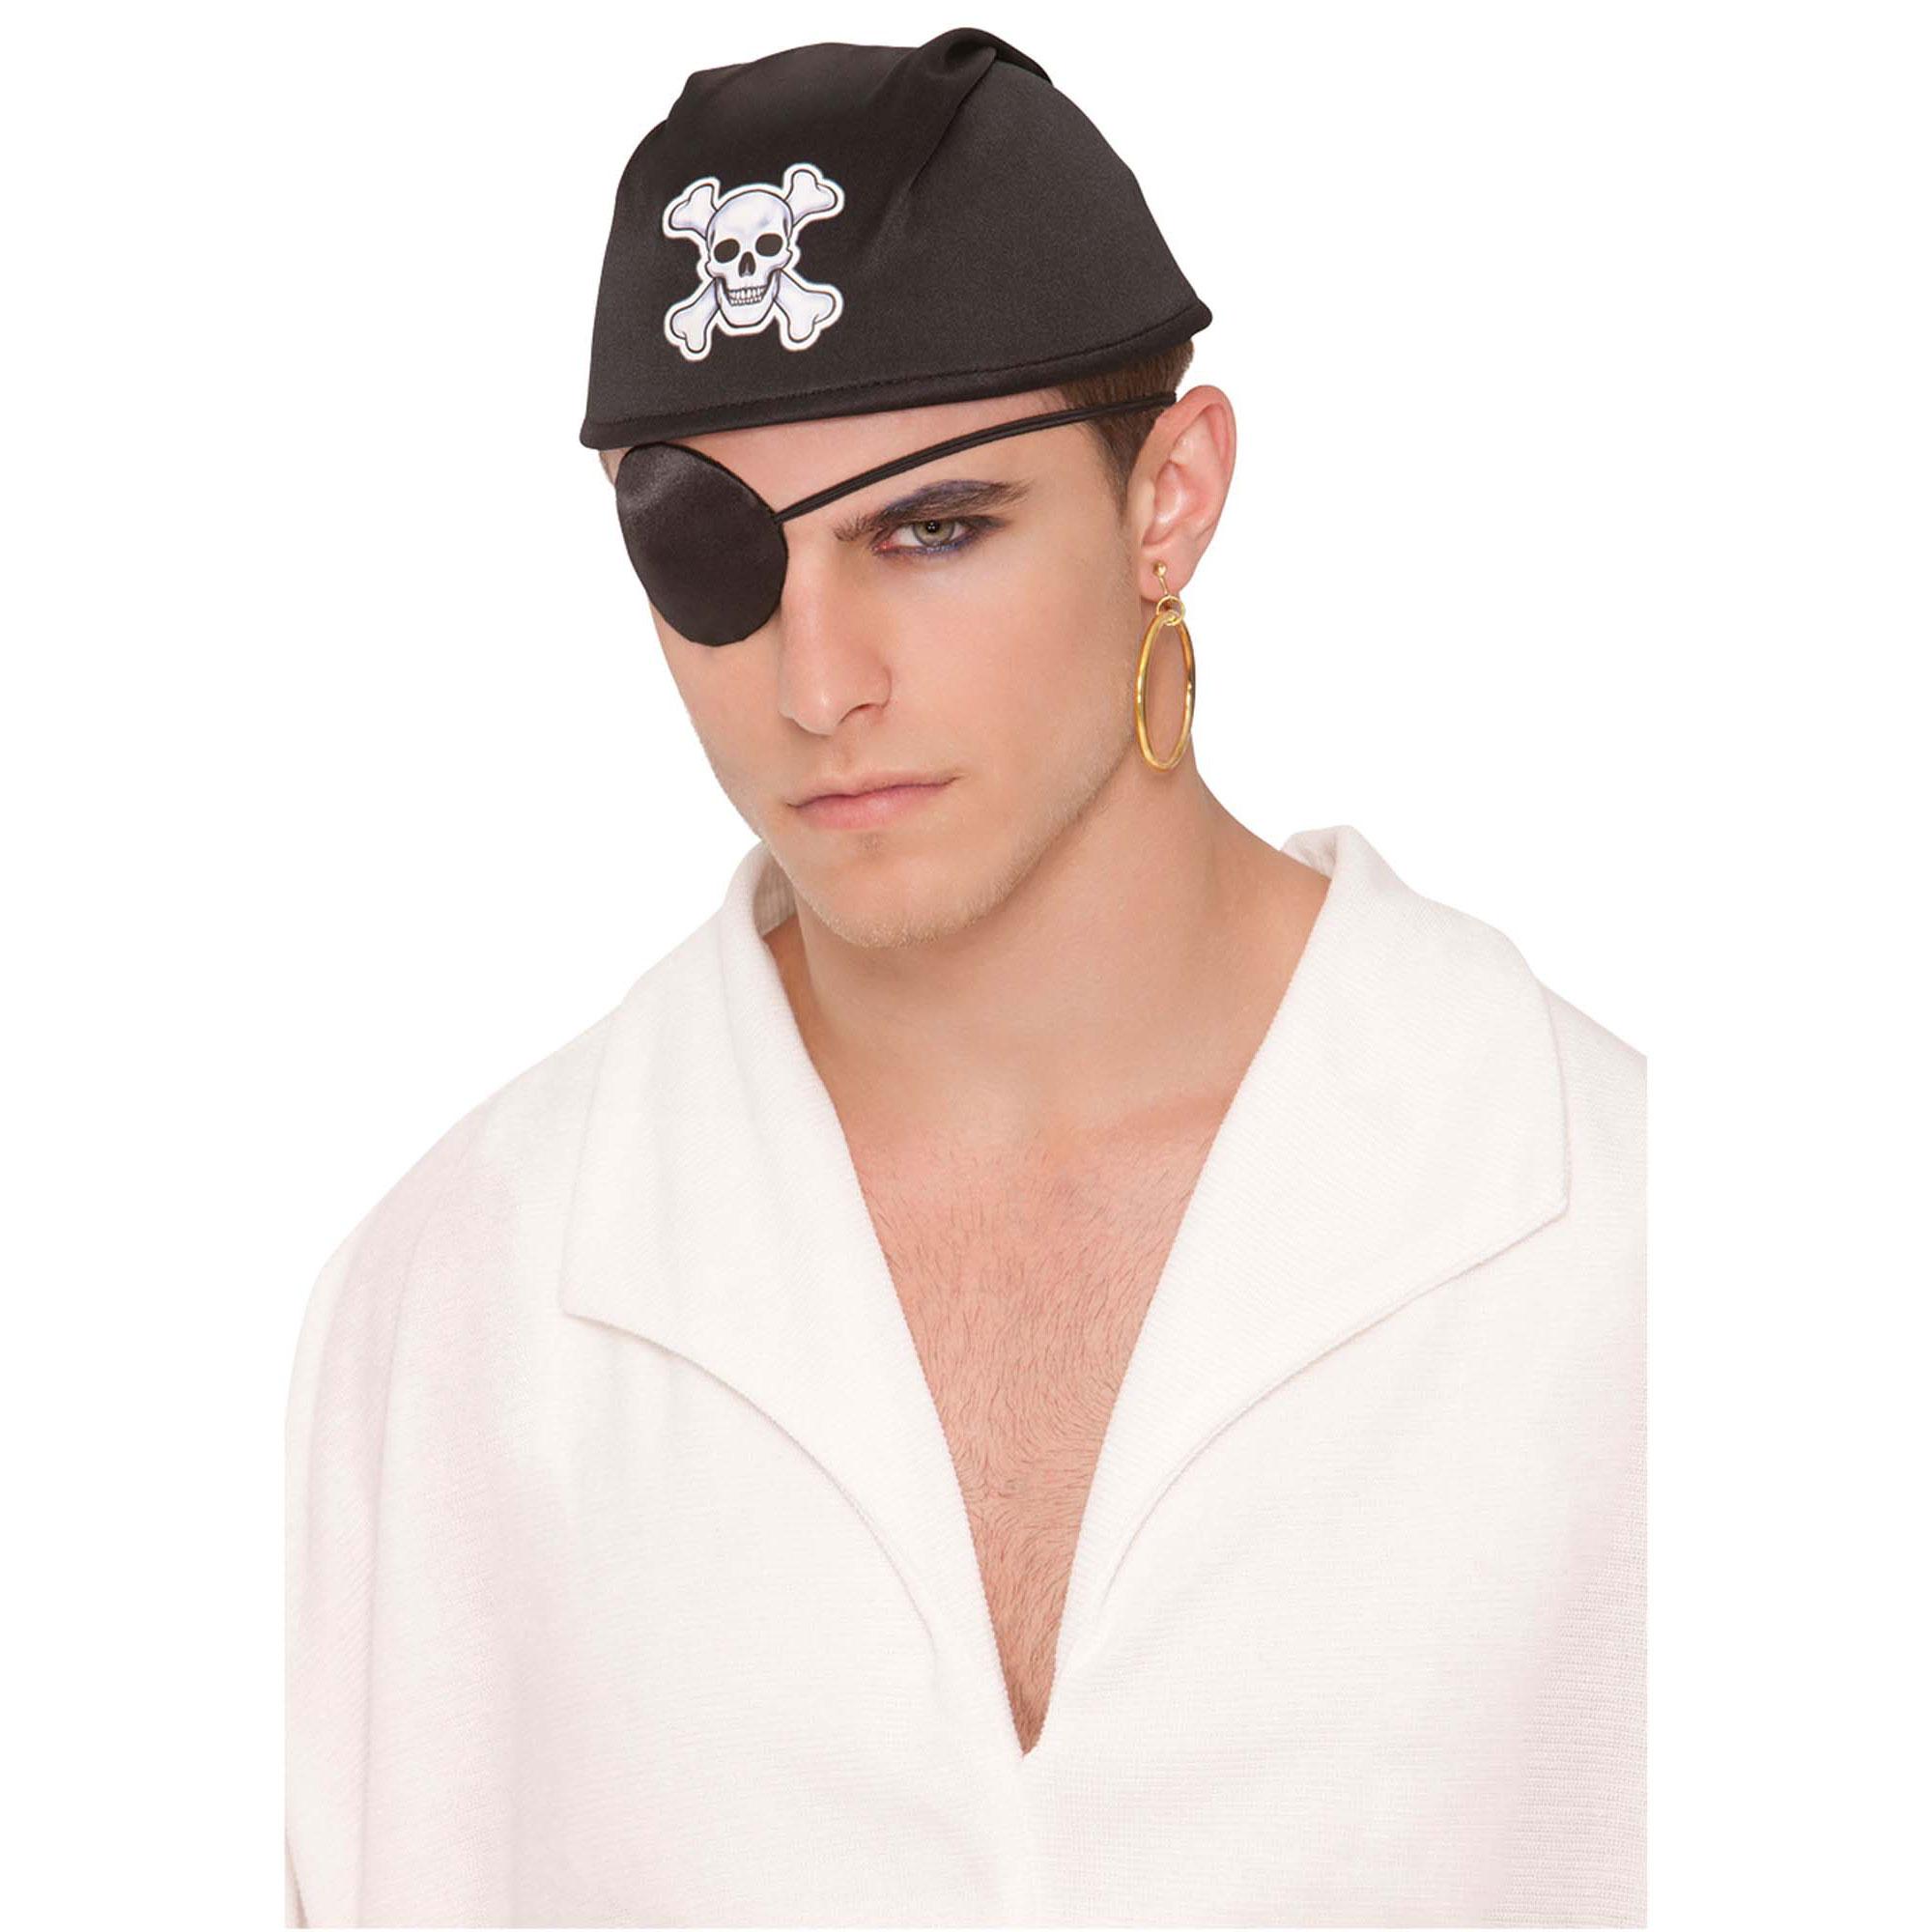 Pirate Earring & Eye Patch Costumes & Apparel - Party Centre